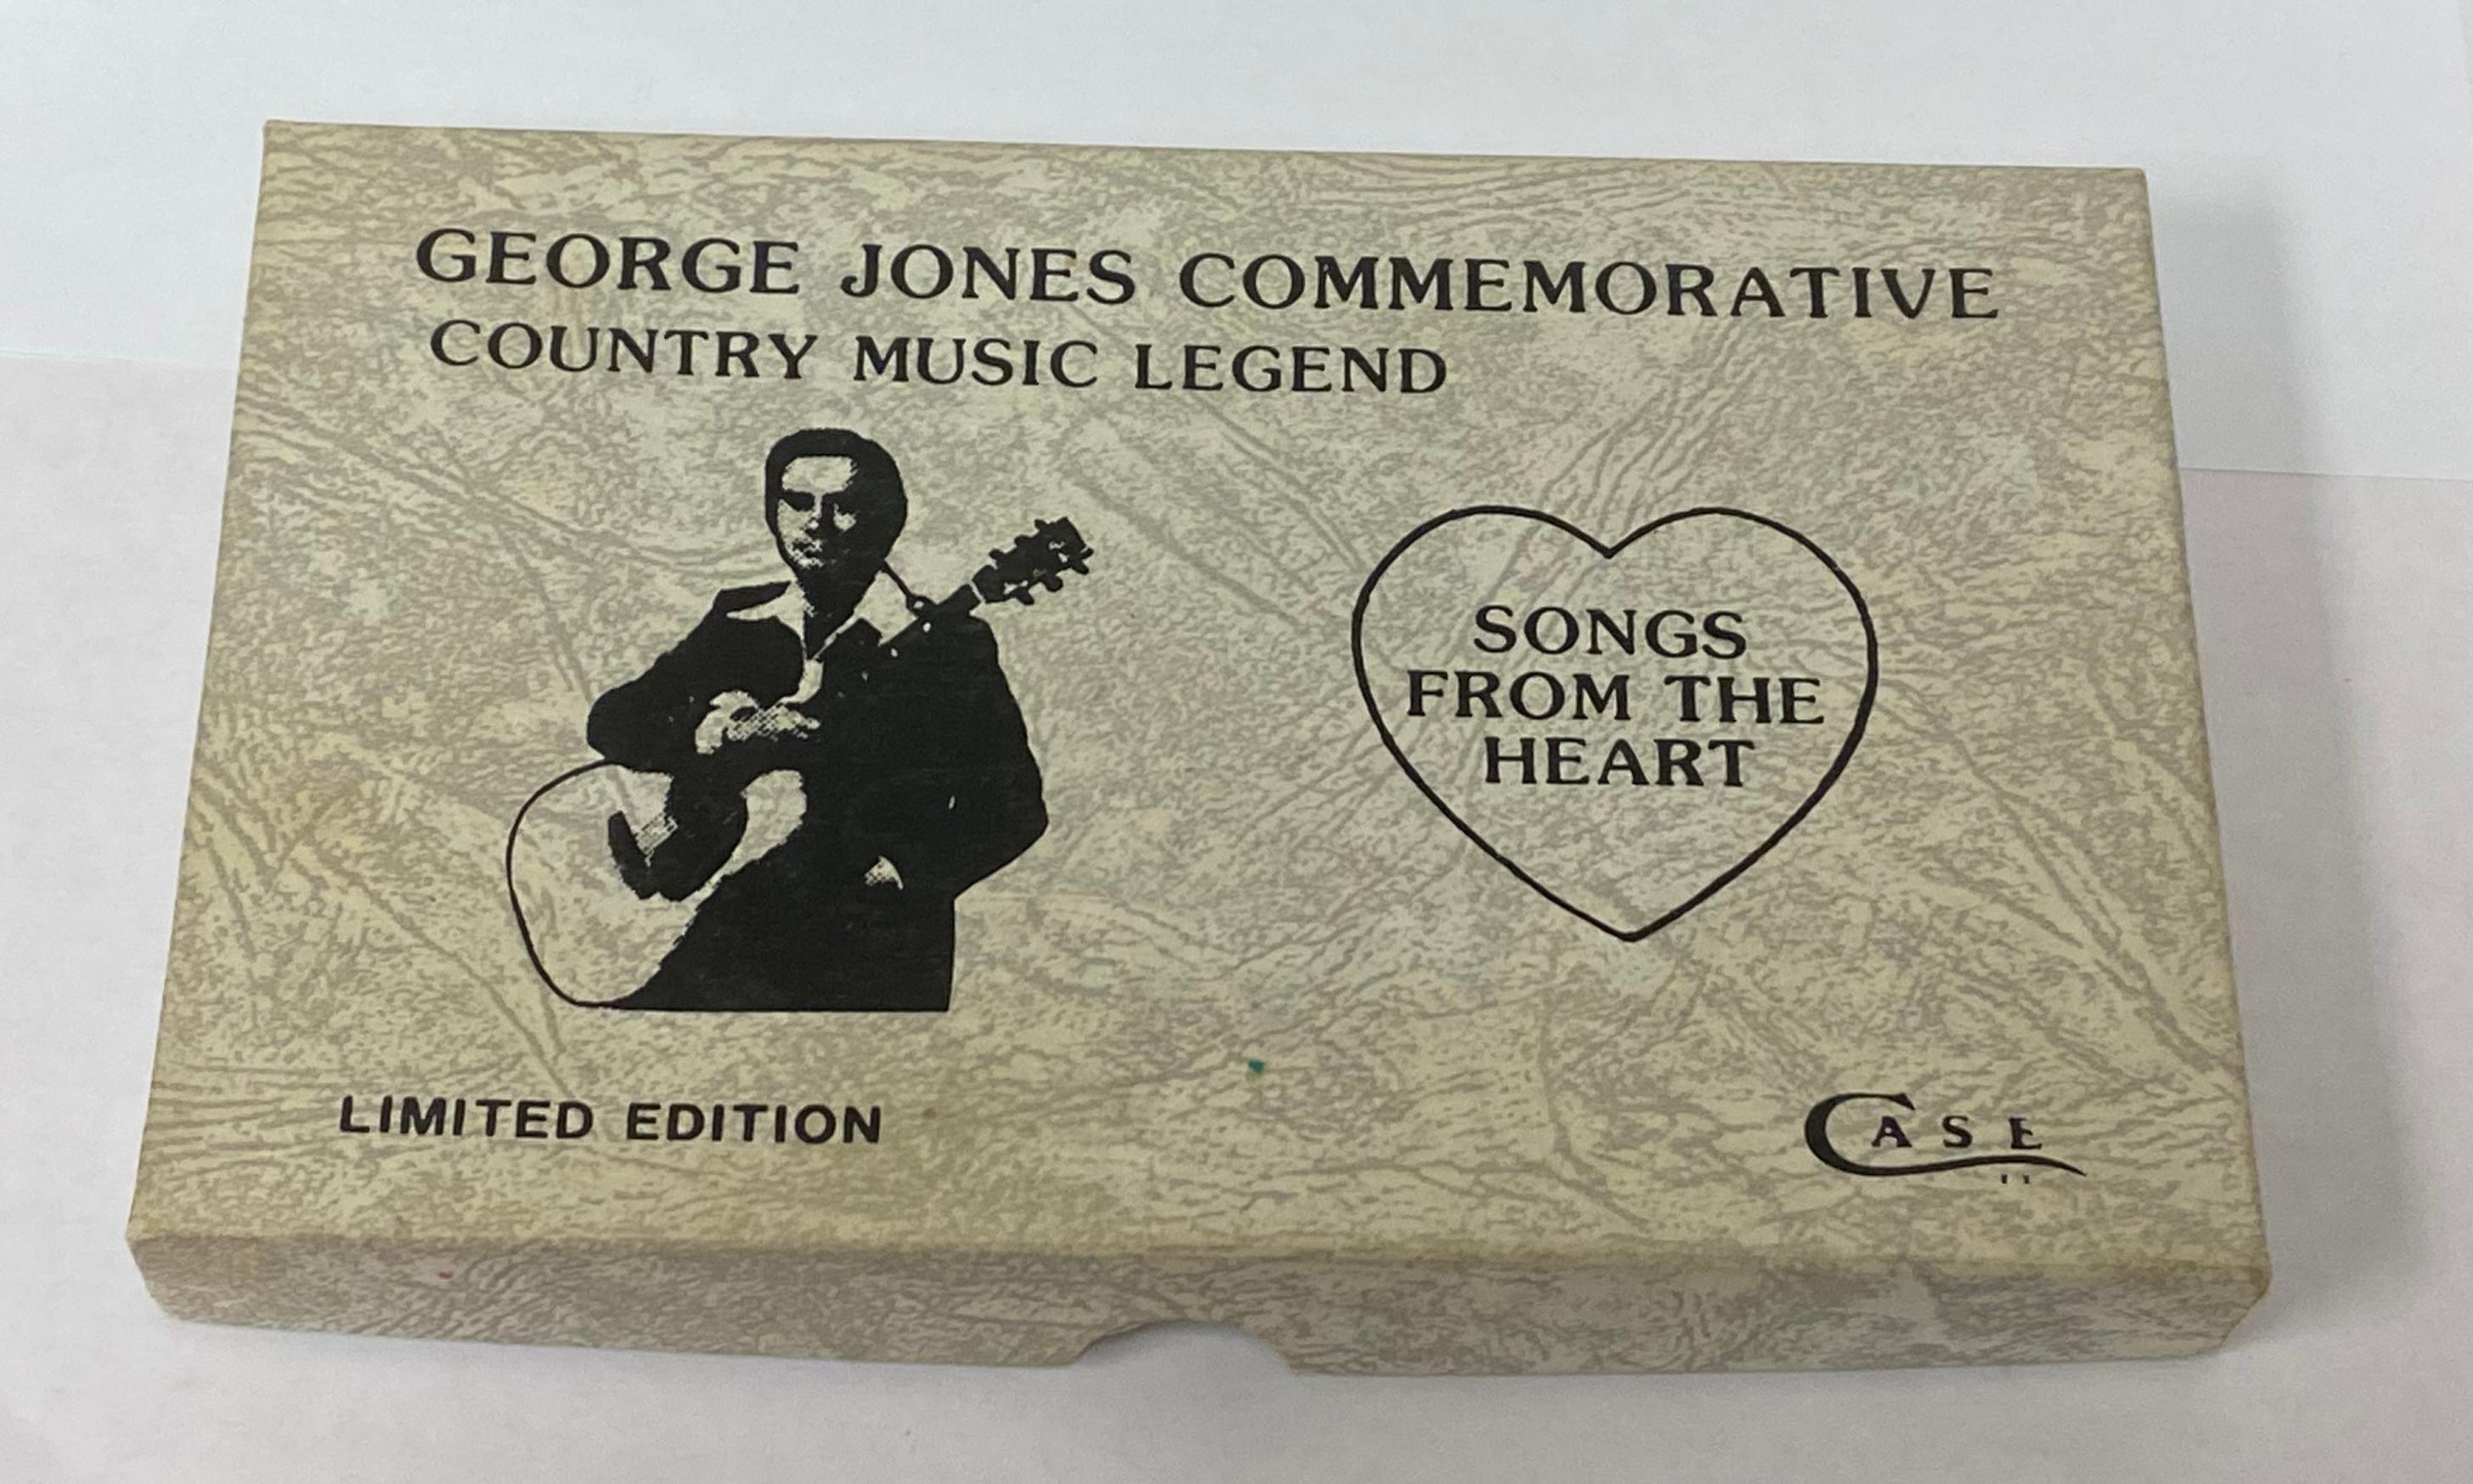 NIB Case XX - George Jones Commemorative "Country Music Legend" Limited Edition Knife in Box